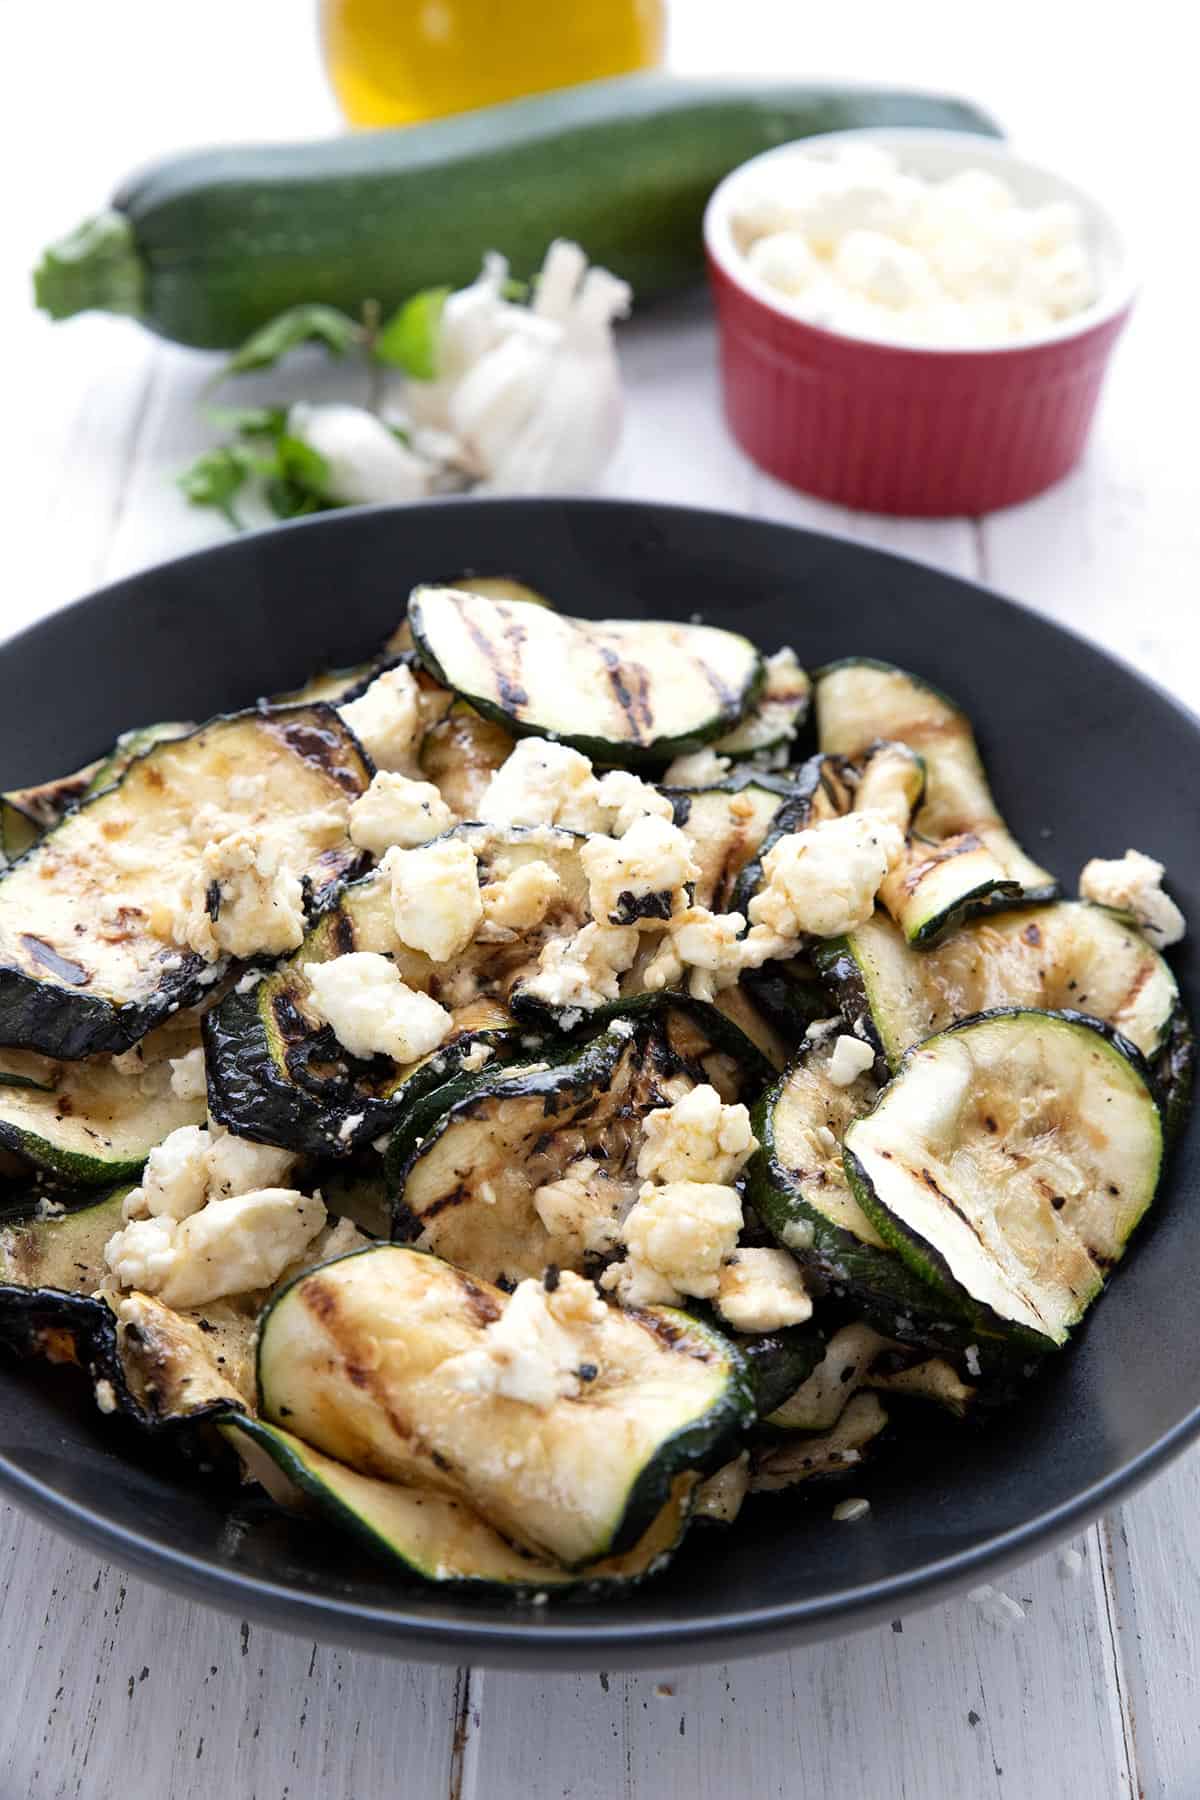 Grilled zucchini in a large black bowl with a whole zucchini, olive oil, and feta in the background.